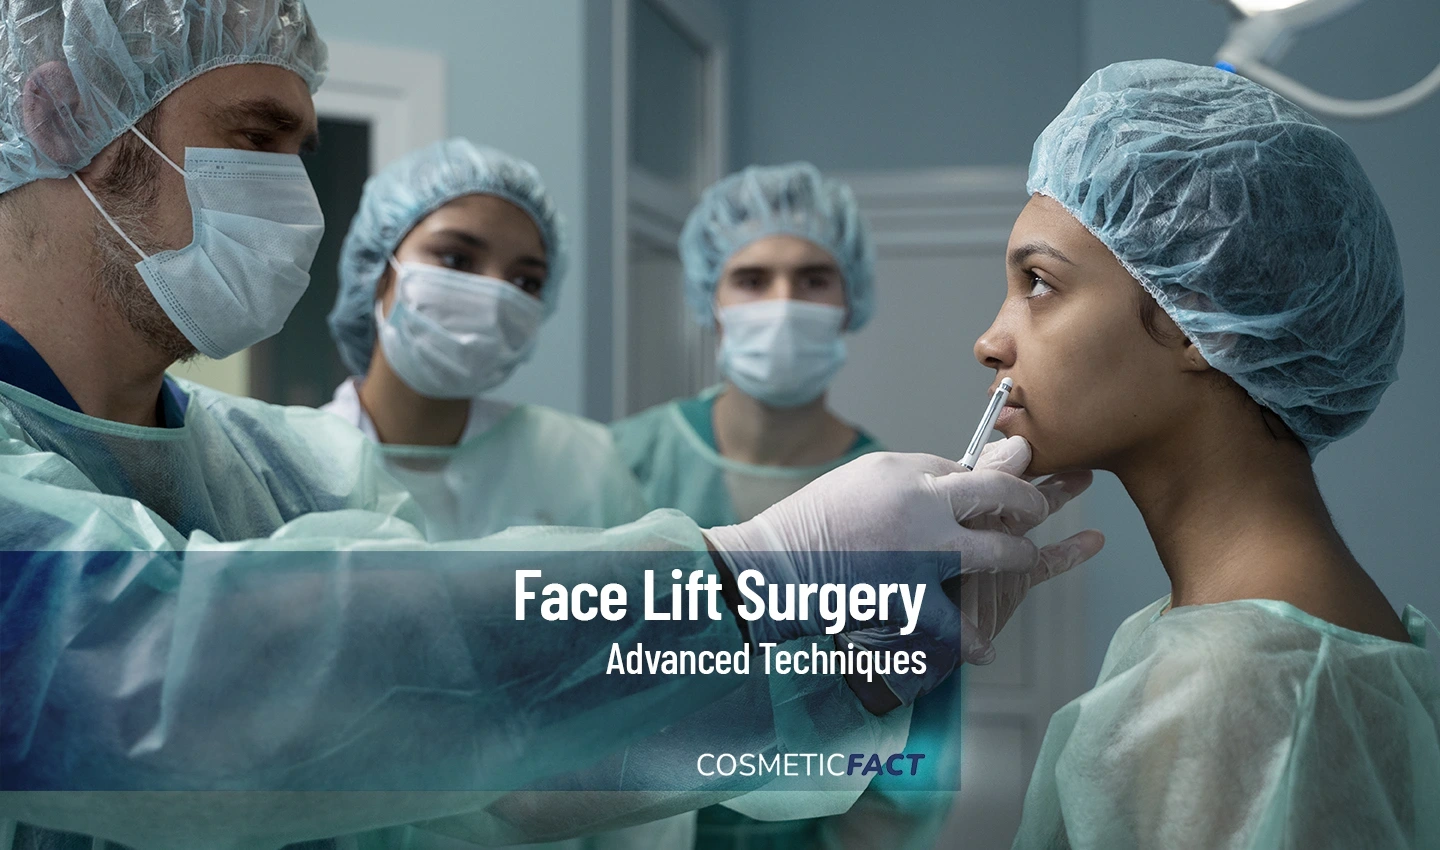 A surgeon and a woman discussing facelift surgery with the latest advancements in technology and techniques.